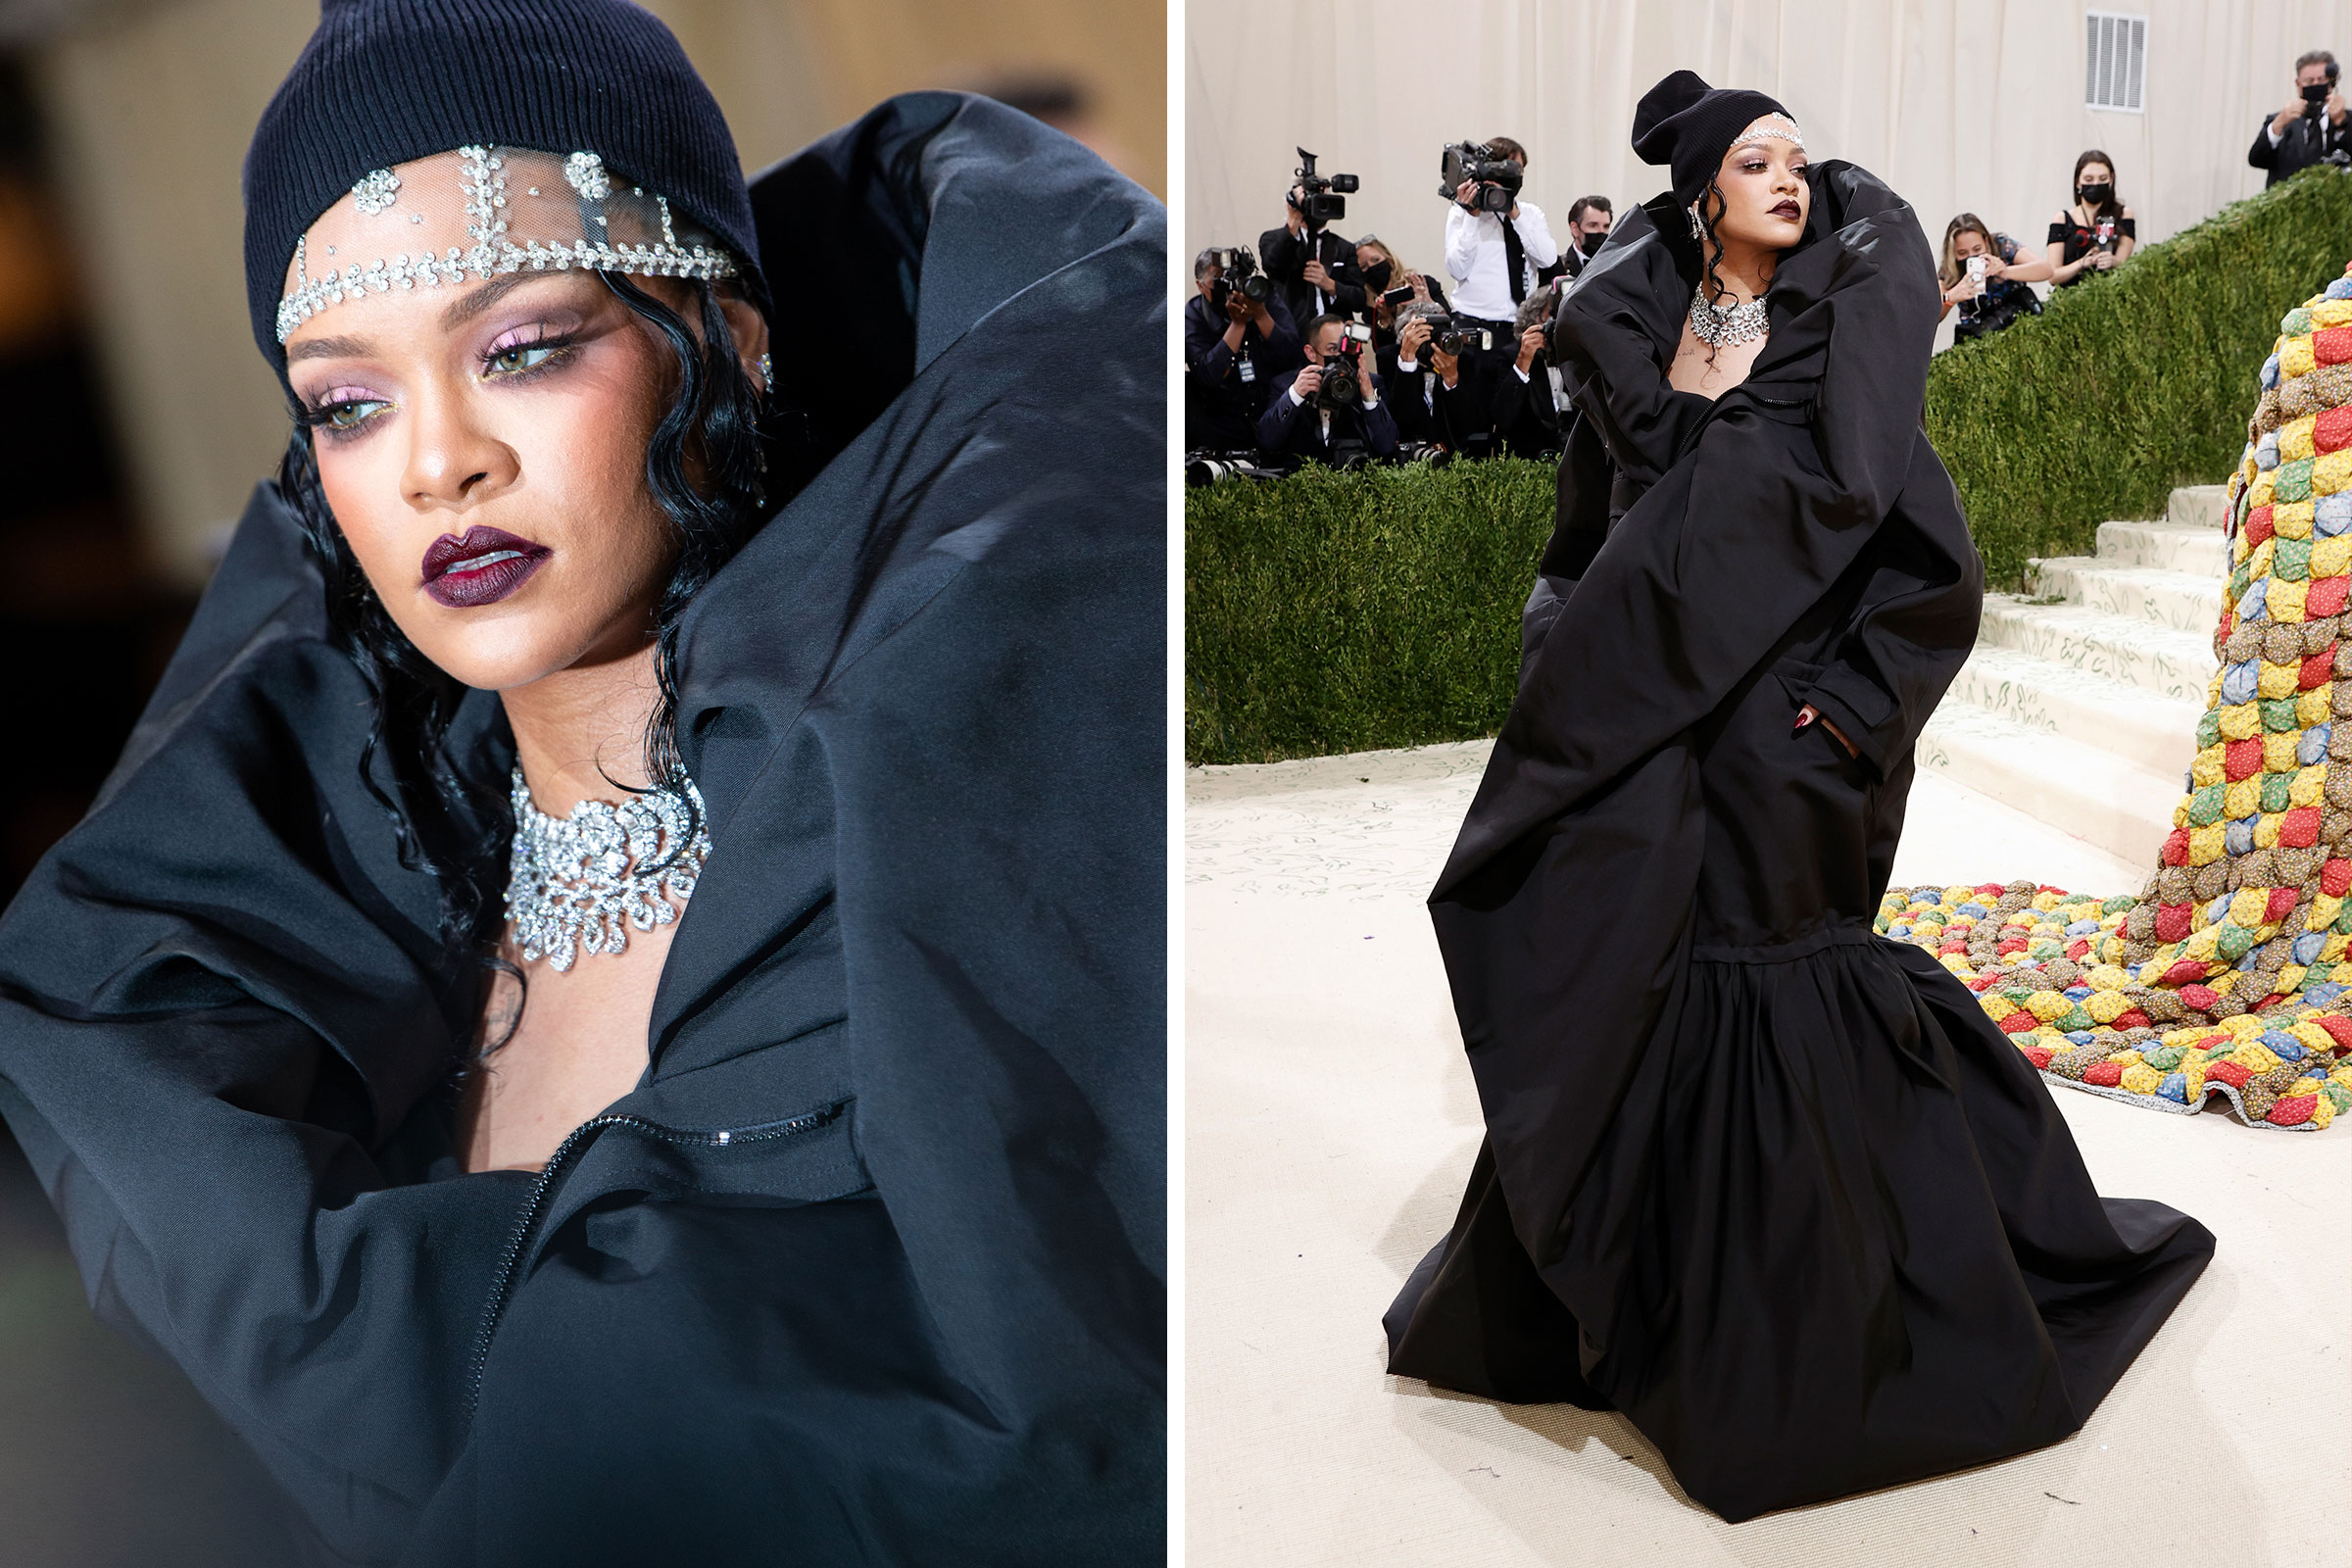 Rihanna attends The 2021 Met Gala Celebrating In America: A Lexicon Of Fashion at Metropolitan Museum of Art on Sept. 13, 2021. (Lexie Moreland—WWD/Penske Media /Getty Images; Arturo Holmes—MG21/Getty Images)